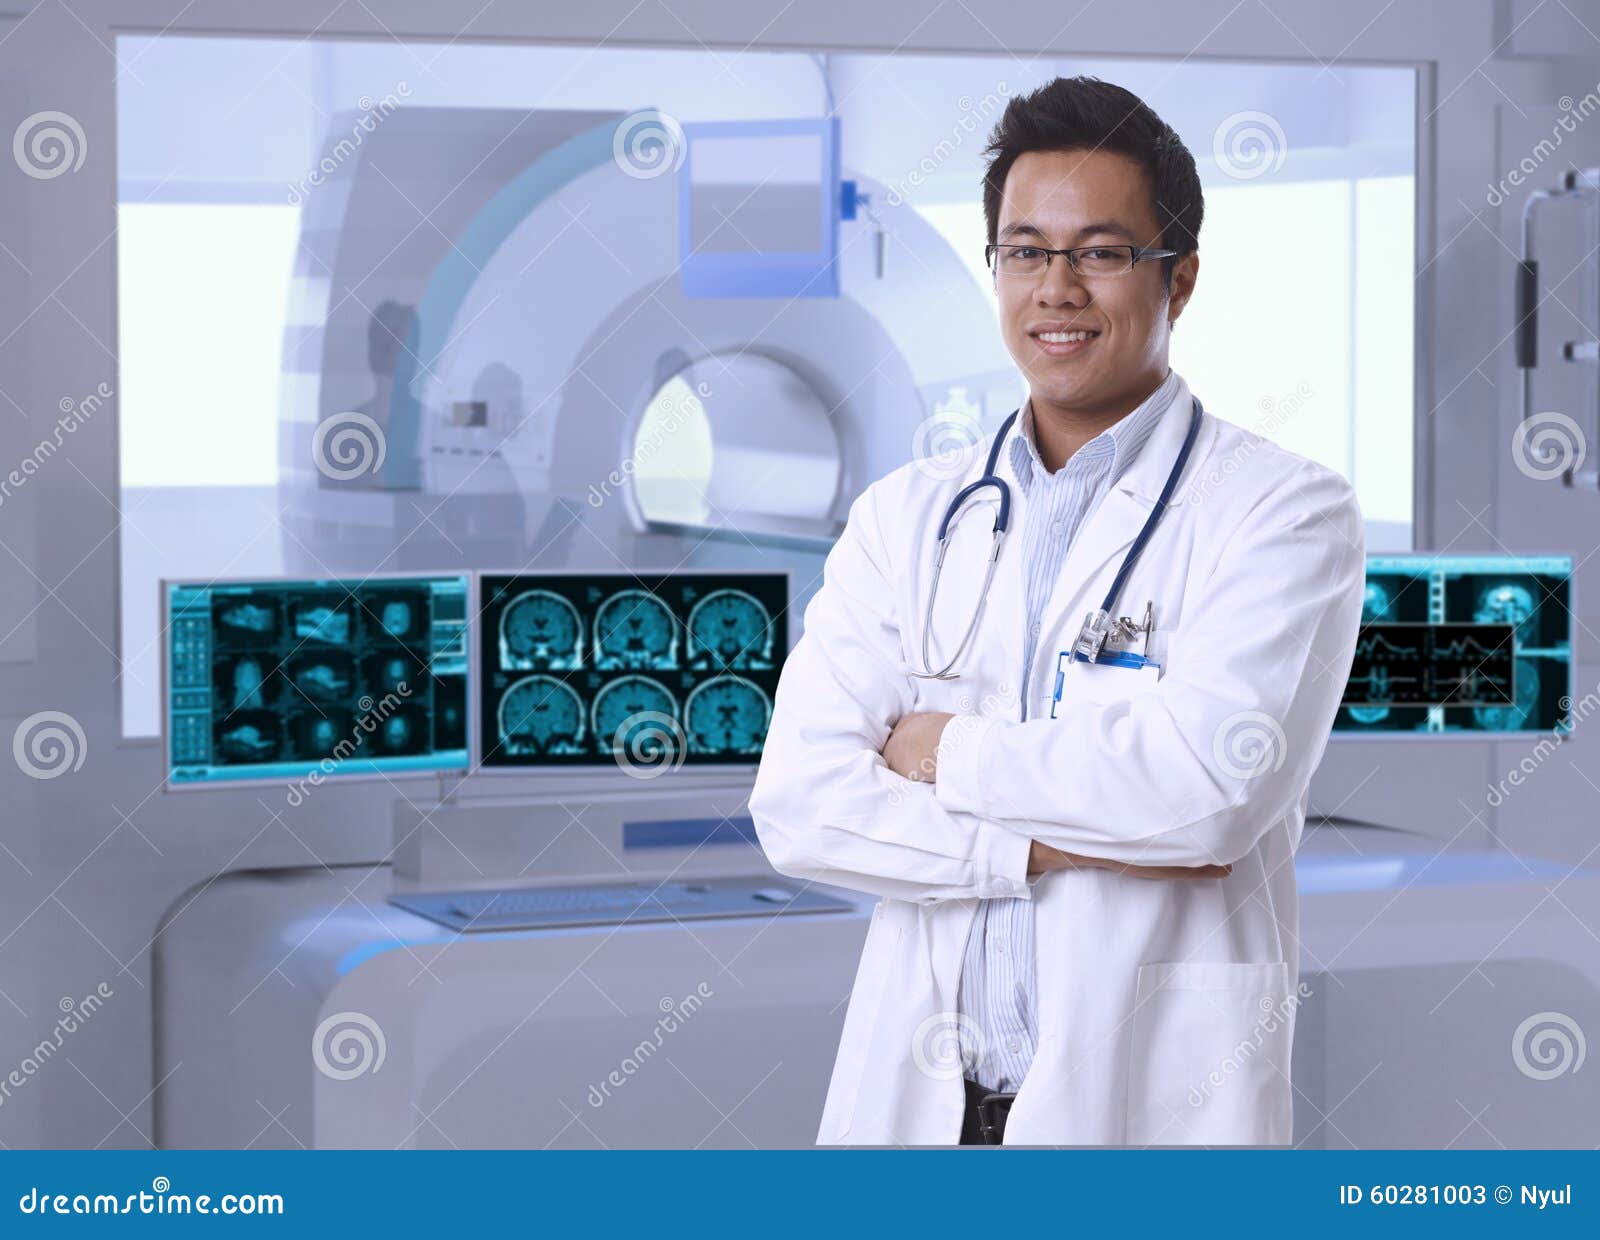 asian doctor in mri room at hospital